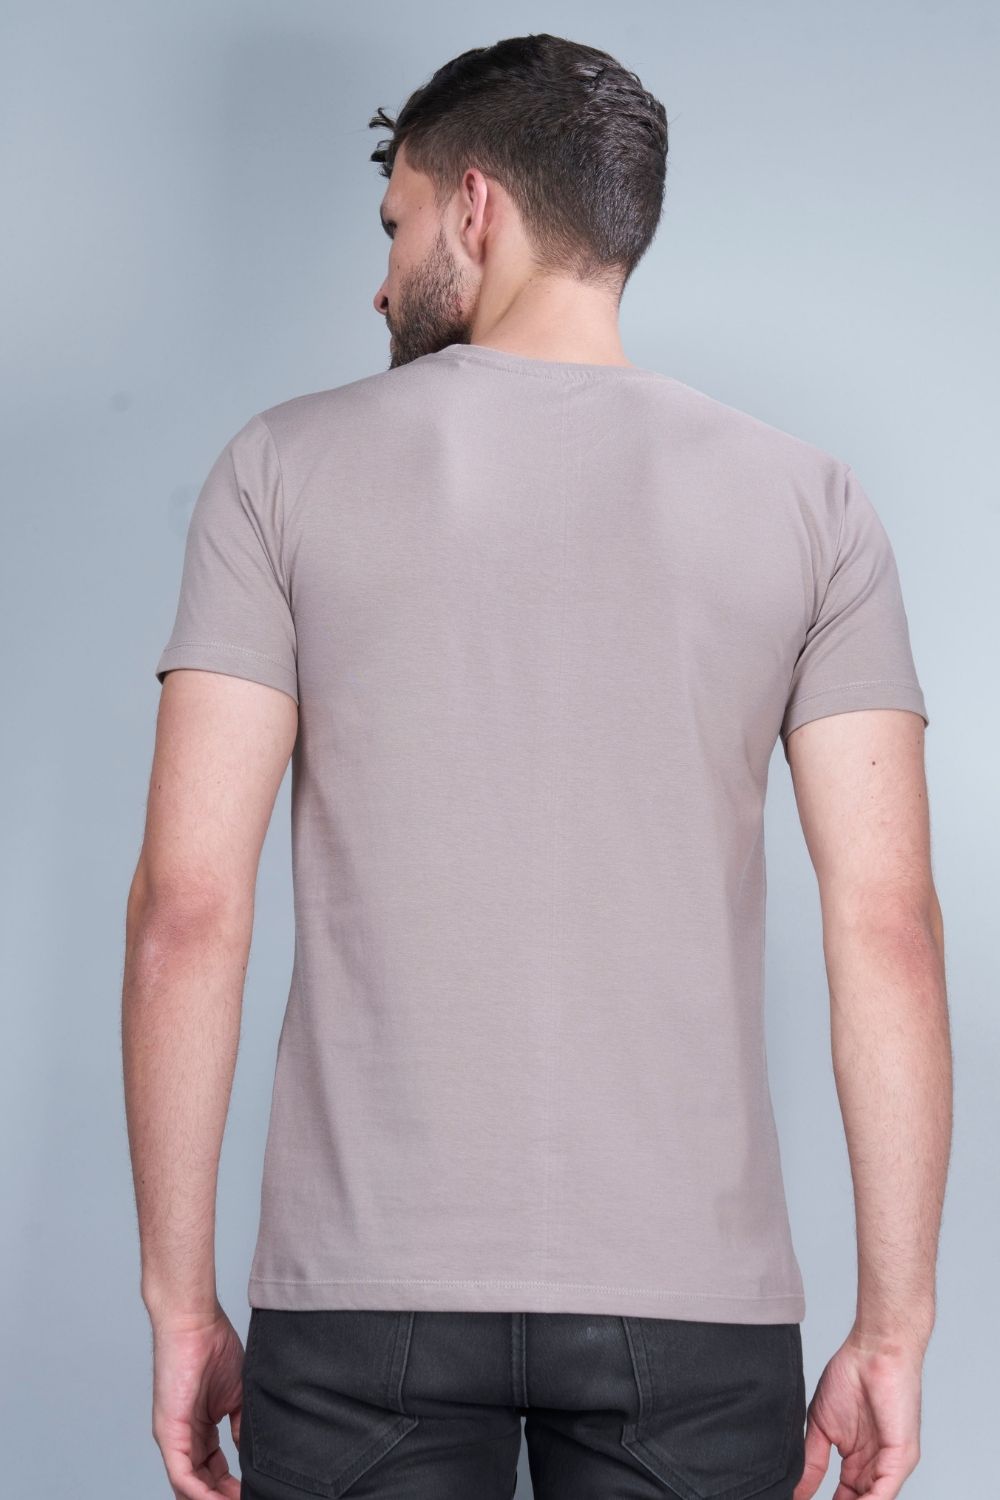 Coin grey colored, solid t shirt for men with round neck and half sleeves, back view.